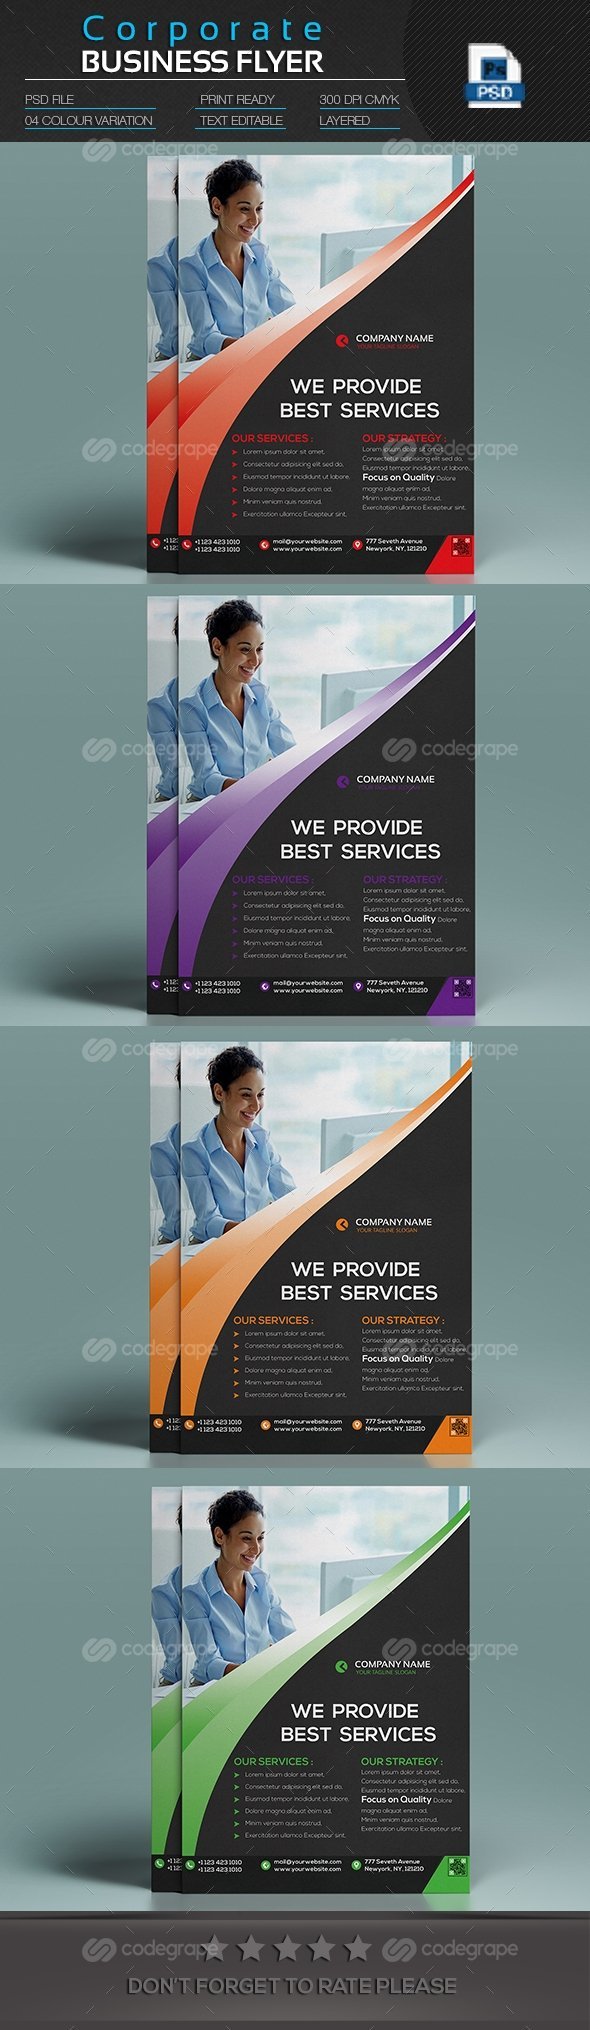 codegrape-9879-corporate-business-flyer